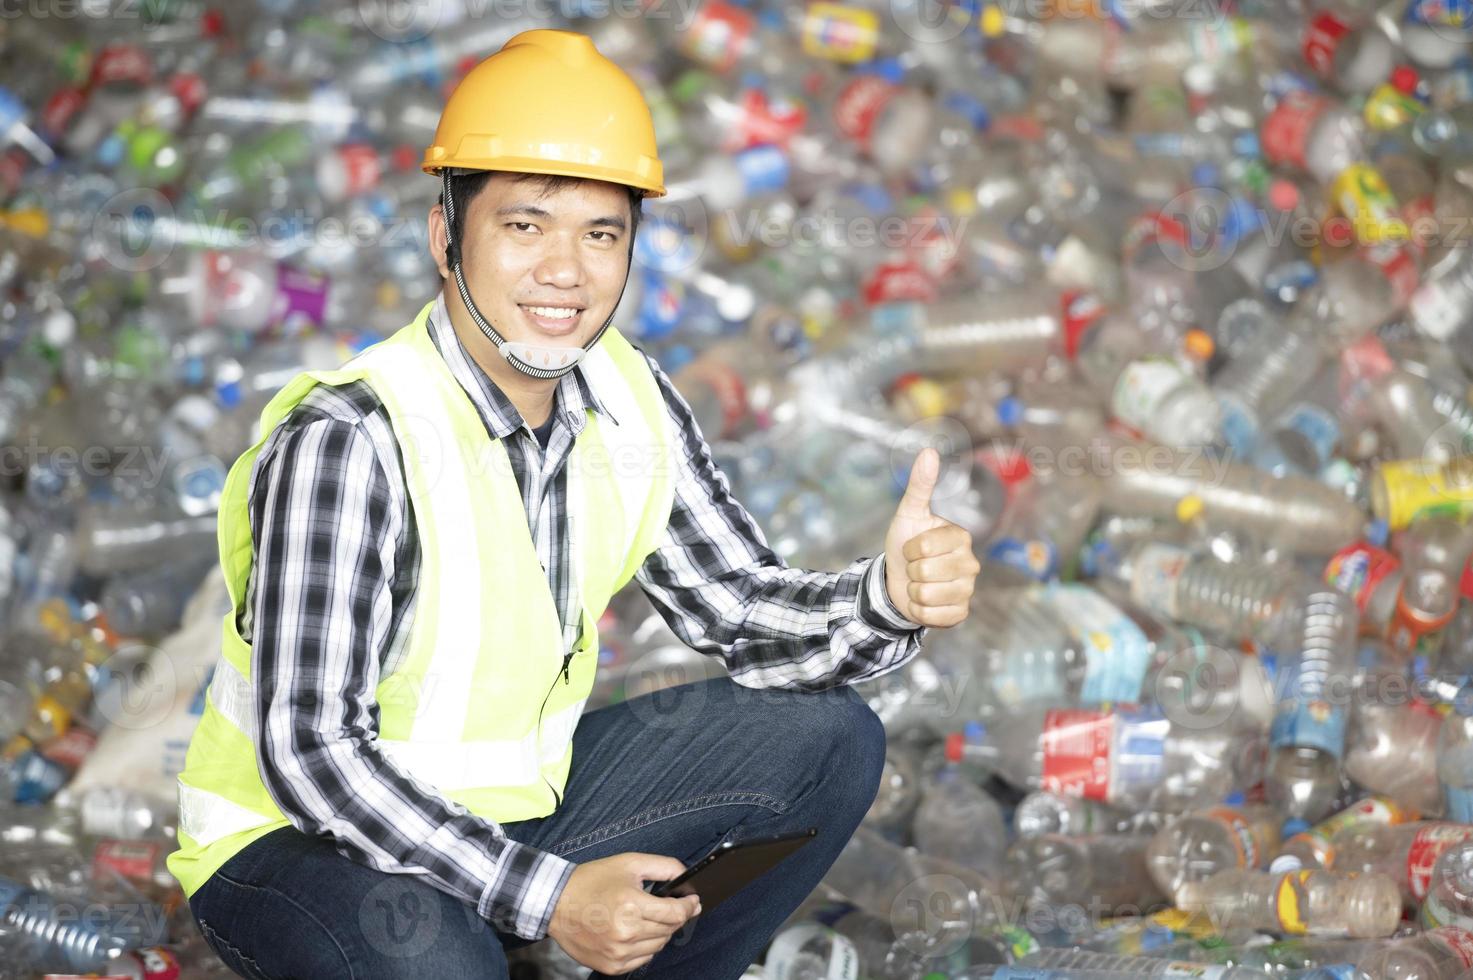 A worker controls the recycling of a recycling plant. Plastic bottles and plastic waste photo